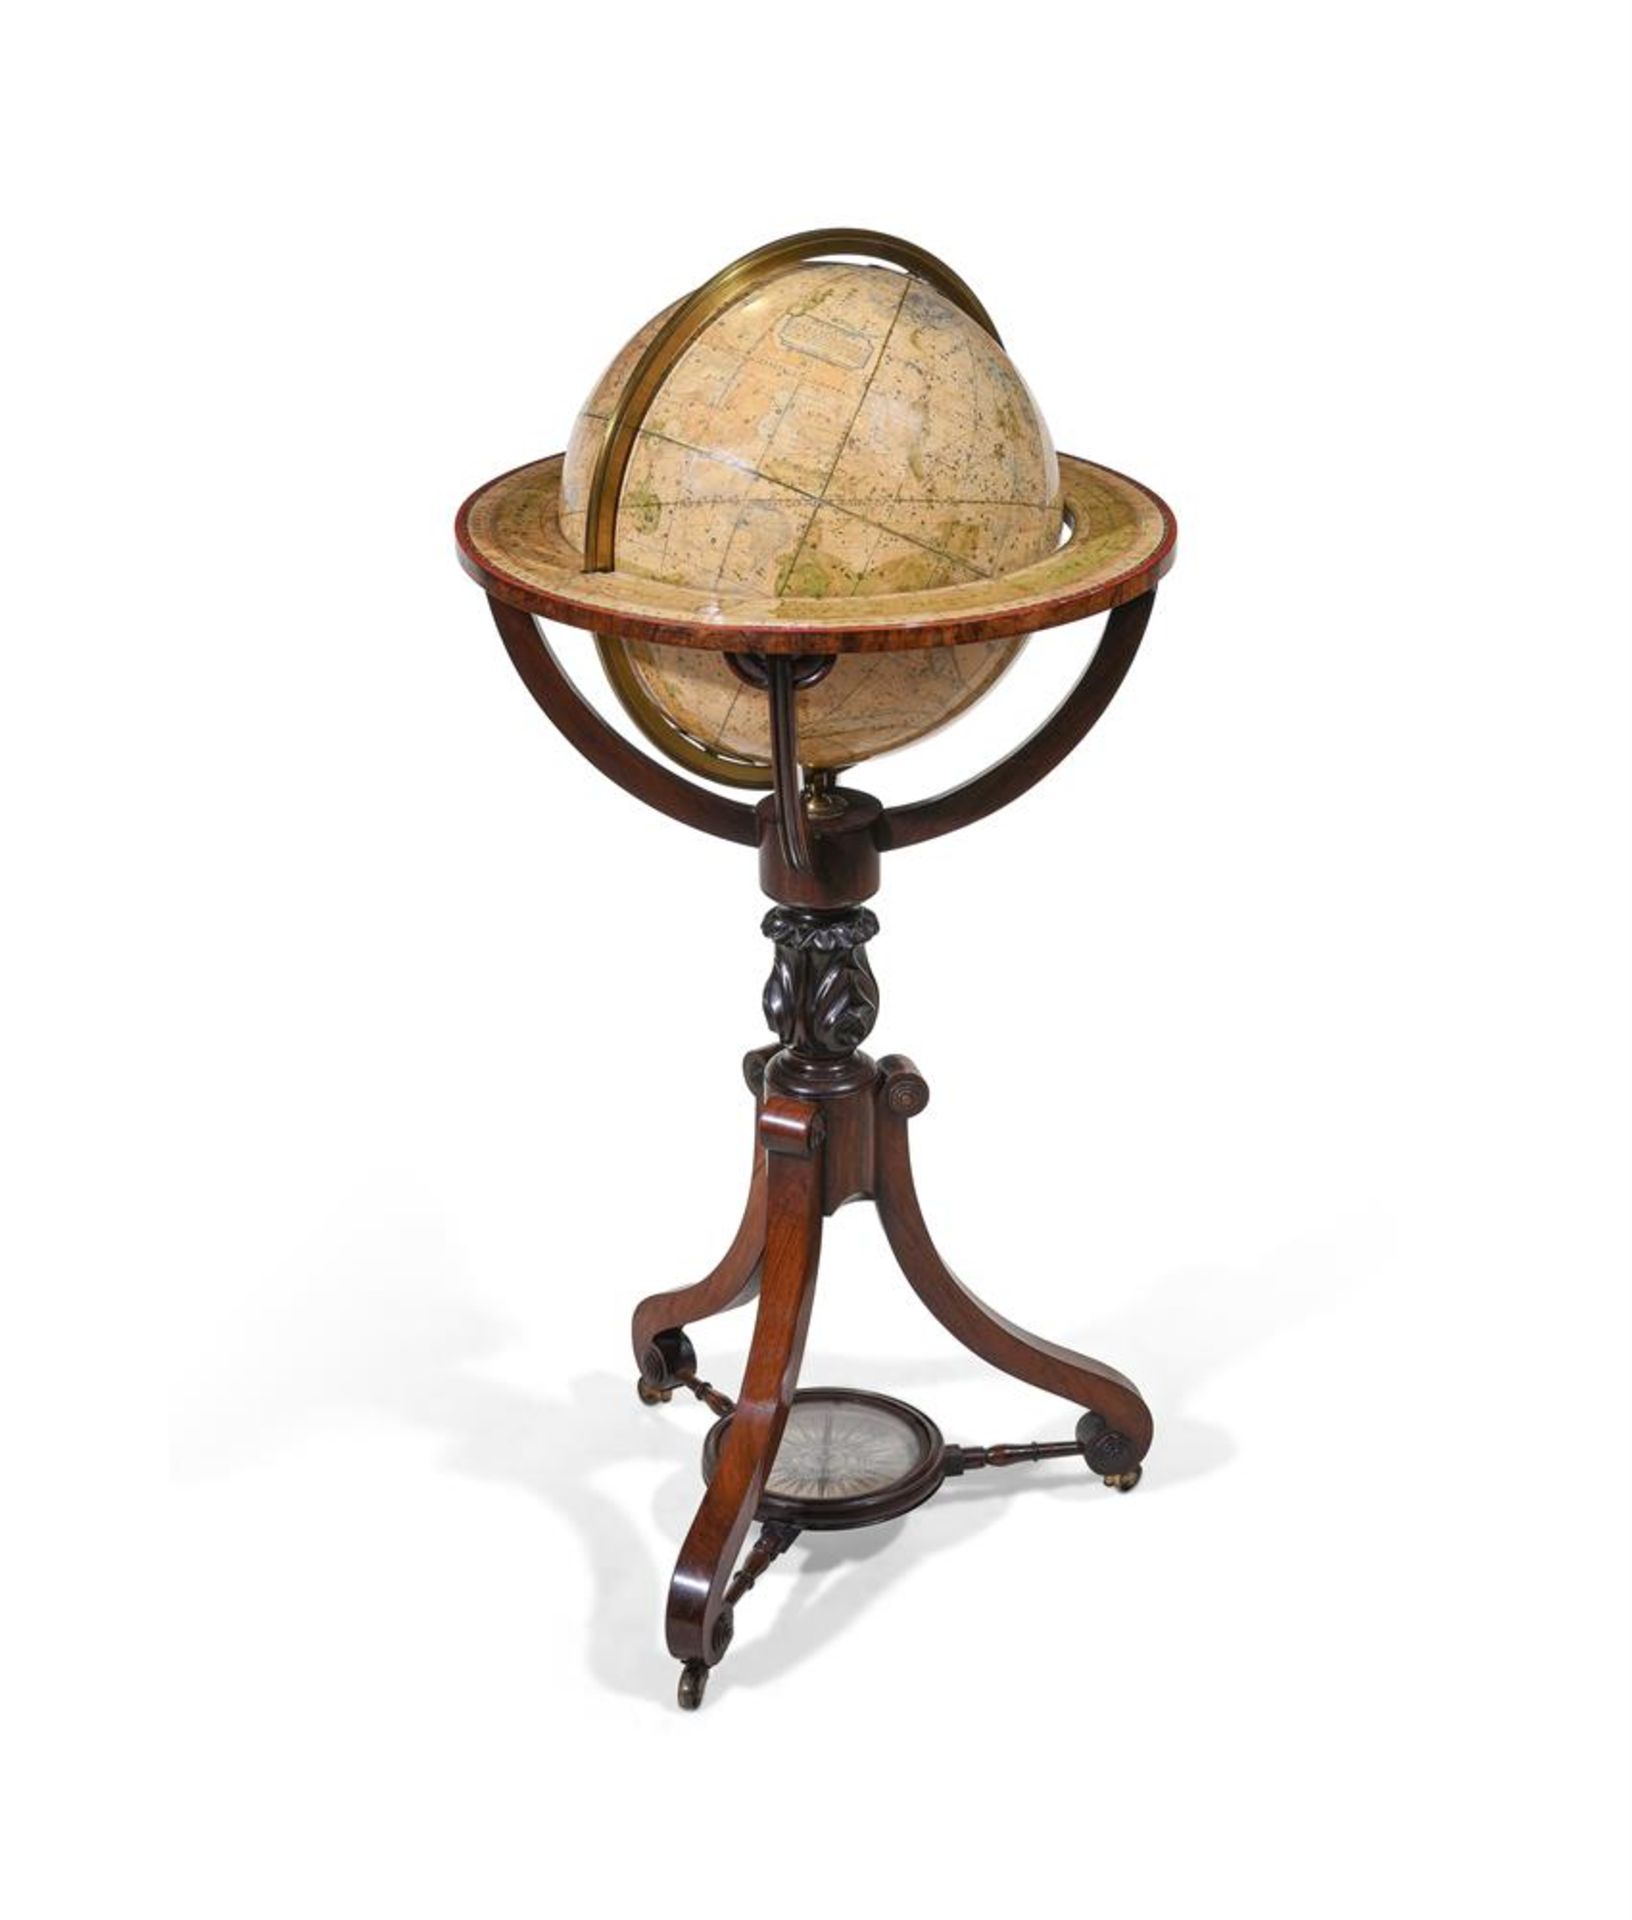 Y A PAIR OF TERRESTRIAL AND CELESTIAL 12 INCH LIBRARY GLOBES ON ROSEWOOD STANDS, BY NEWTON & SON - Image 3 of 7